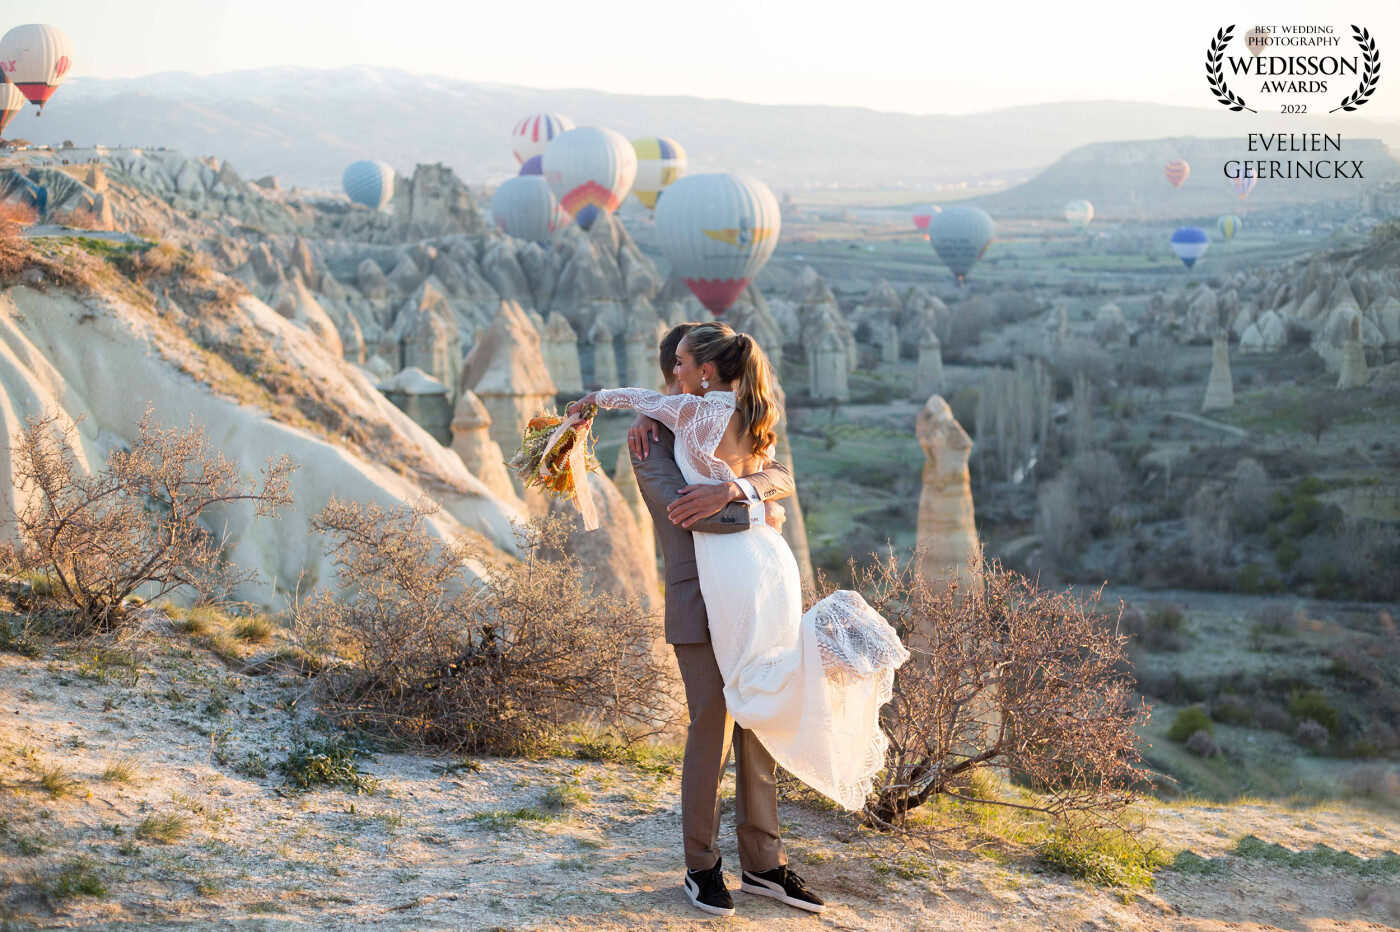 Every morning before sunset, hundreds of hot air balloons go up in Cappadocia (Turkey). This scenery really felt like a fairytale!